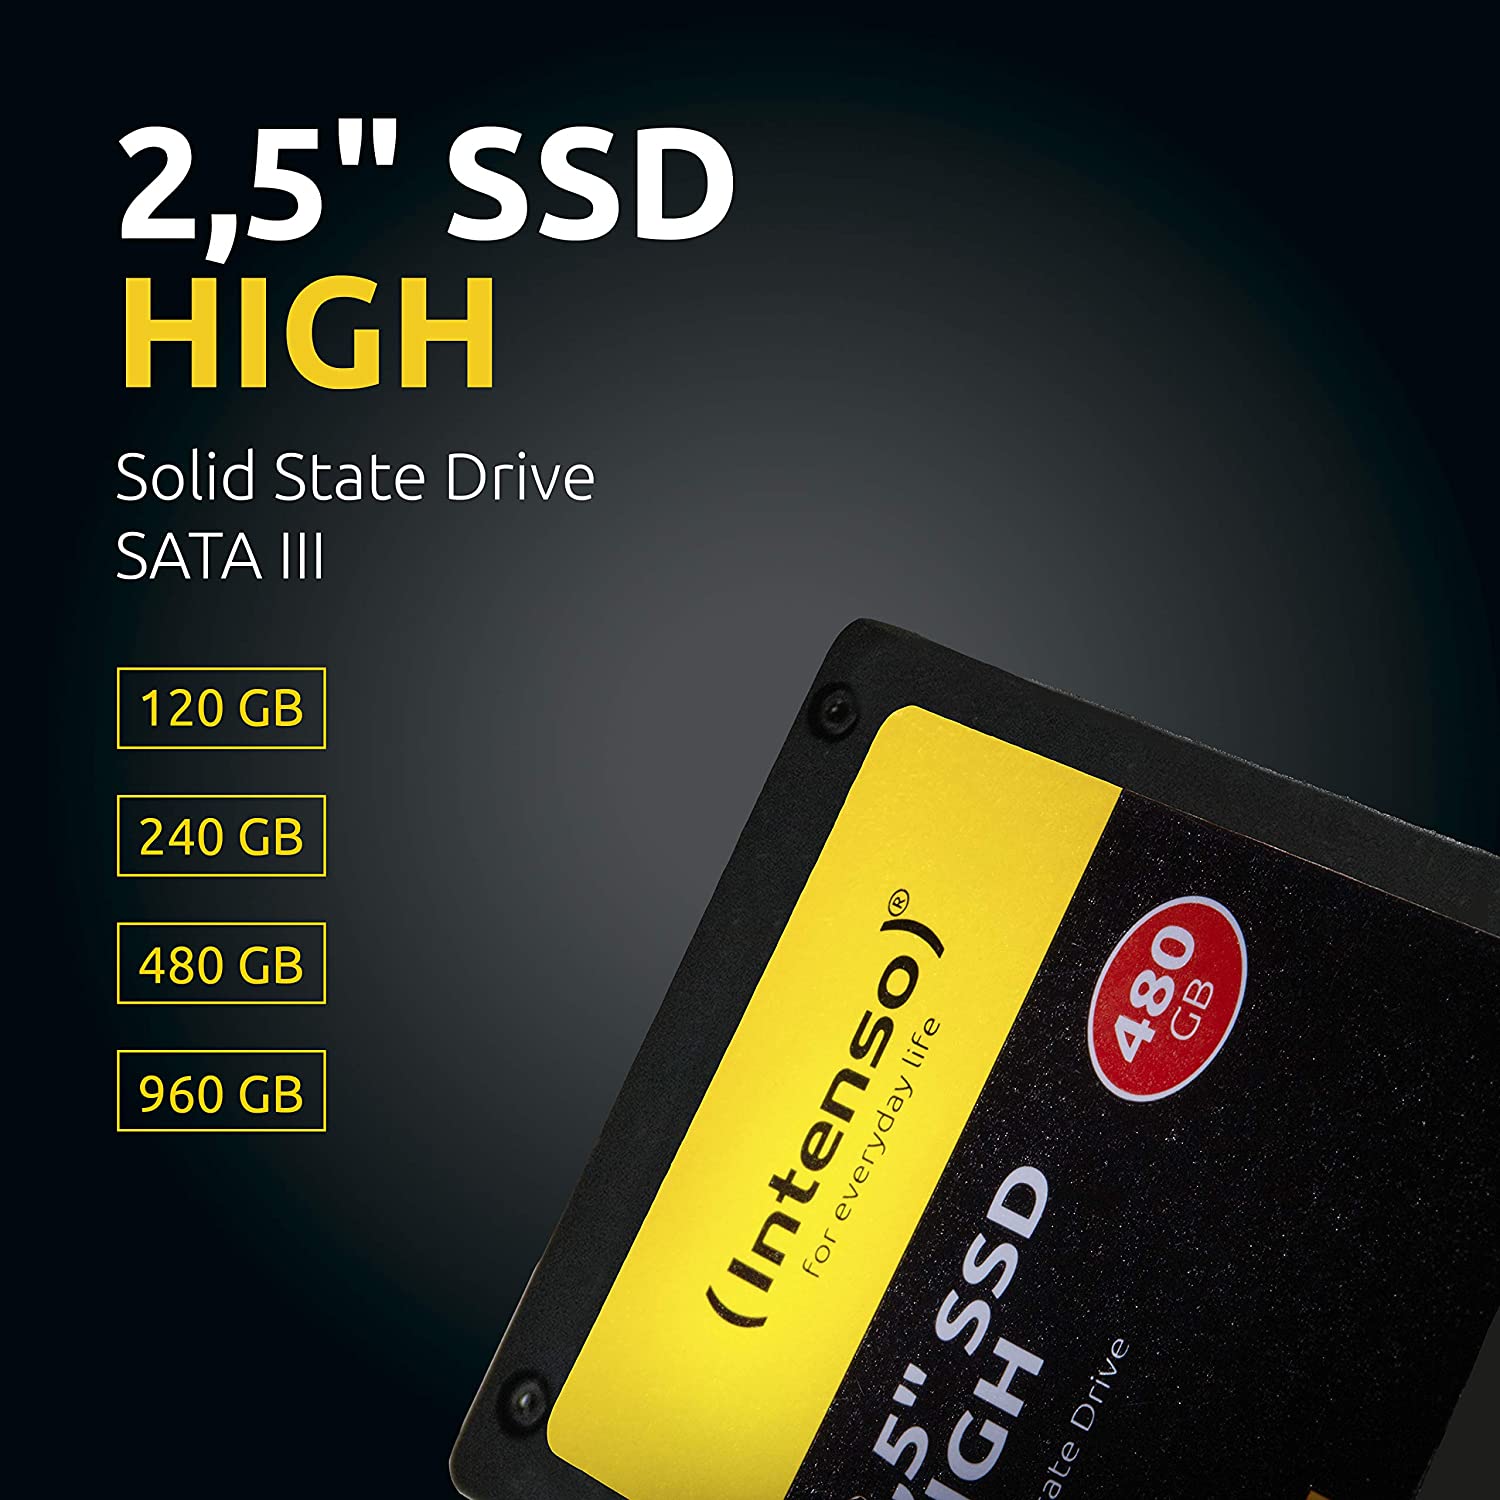 Heir flow Imitation INTENSO SSD 240GB 2.5″ SATA III HIGH – Officeserv Group